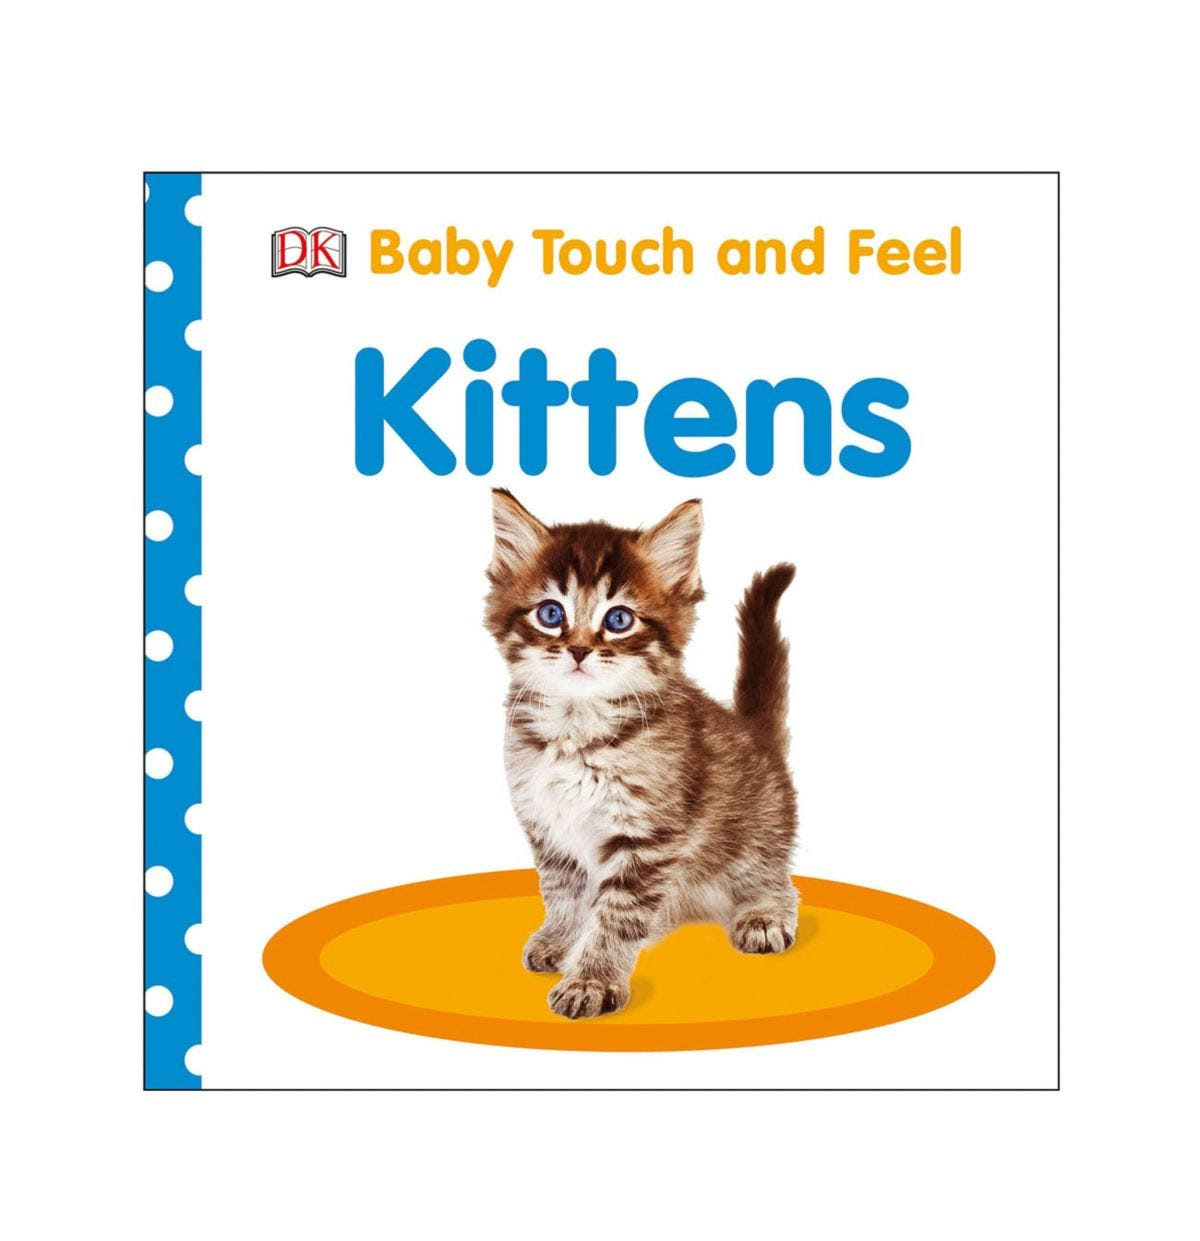 Baby Touch and Feel: Kittens - DK